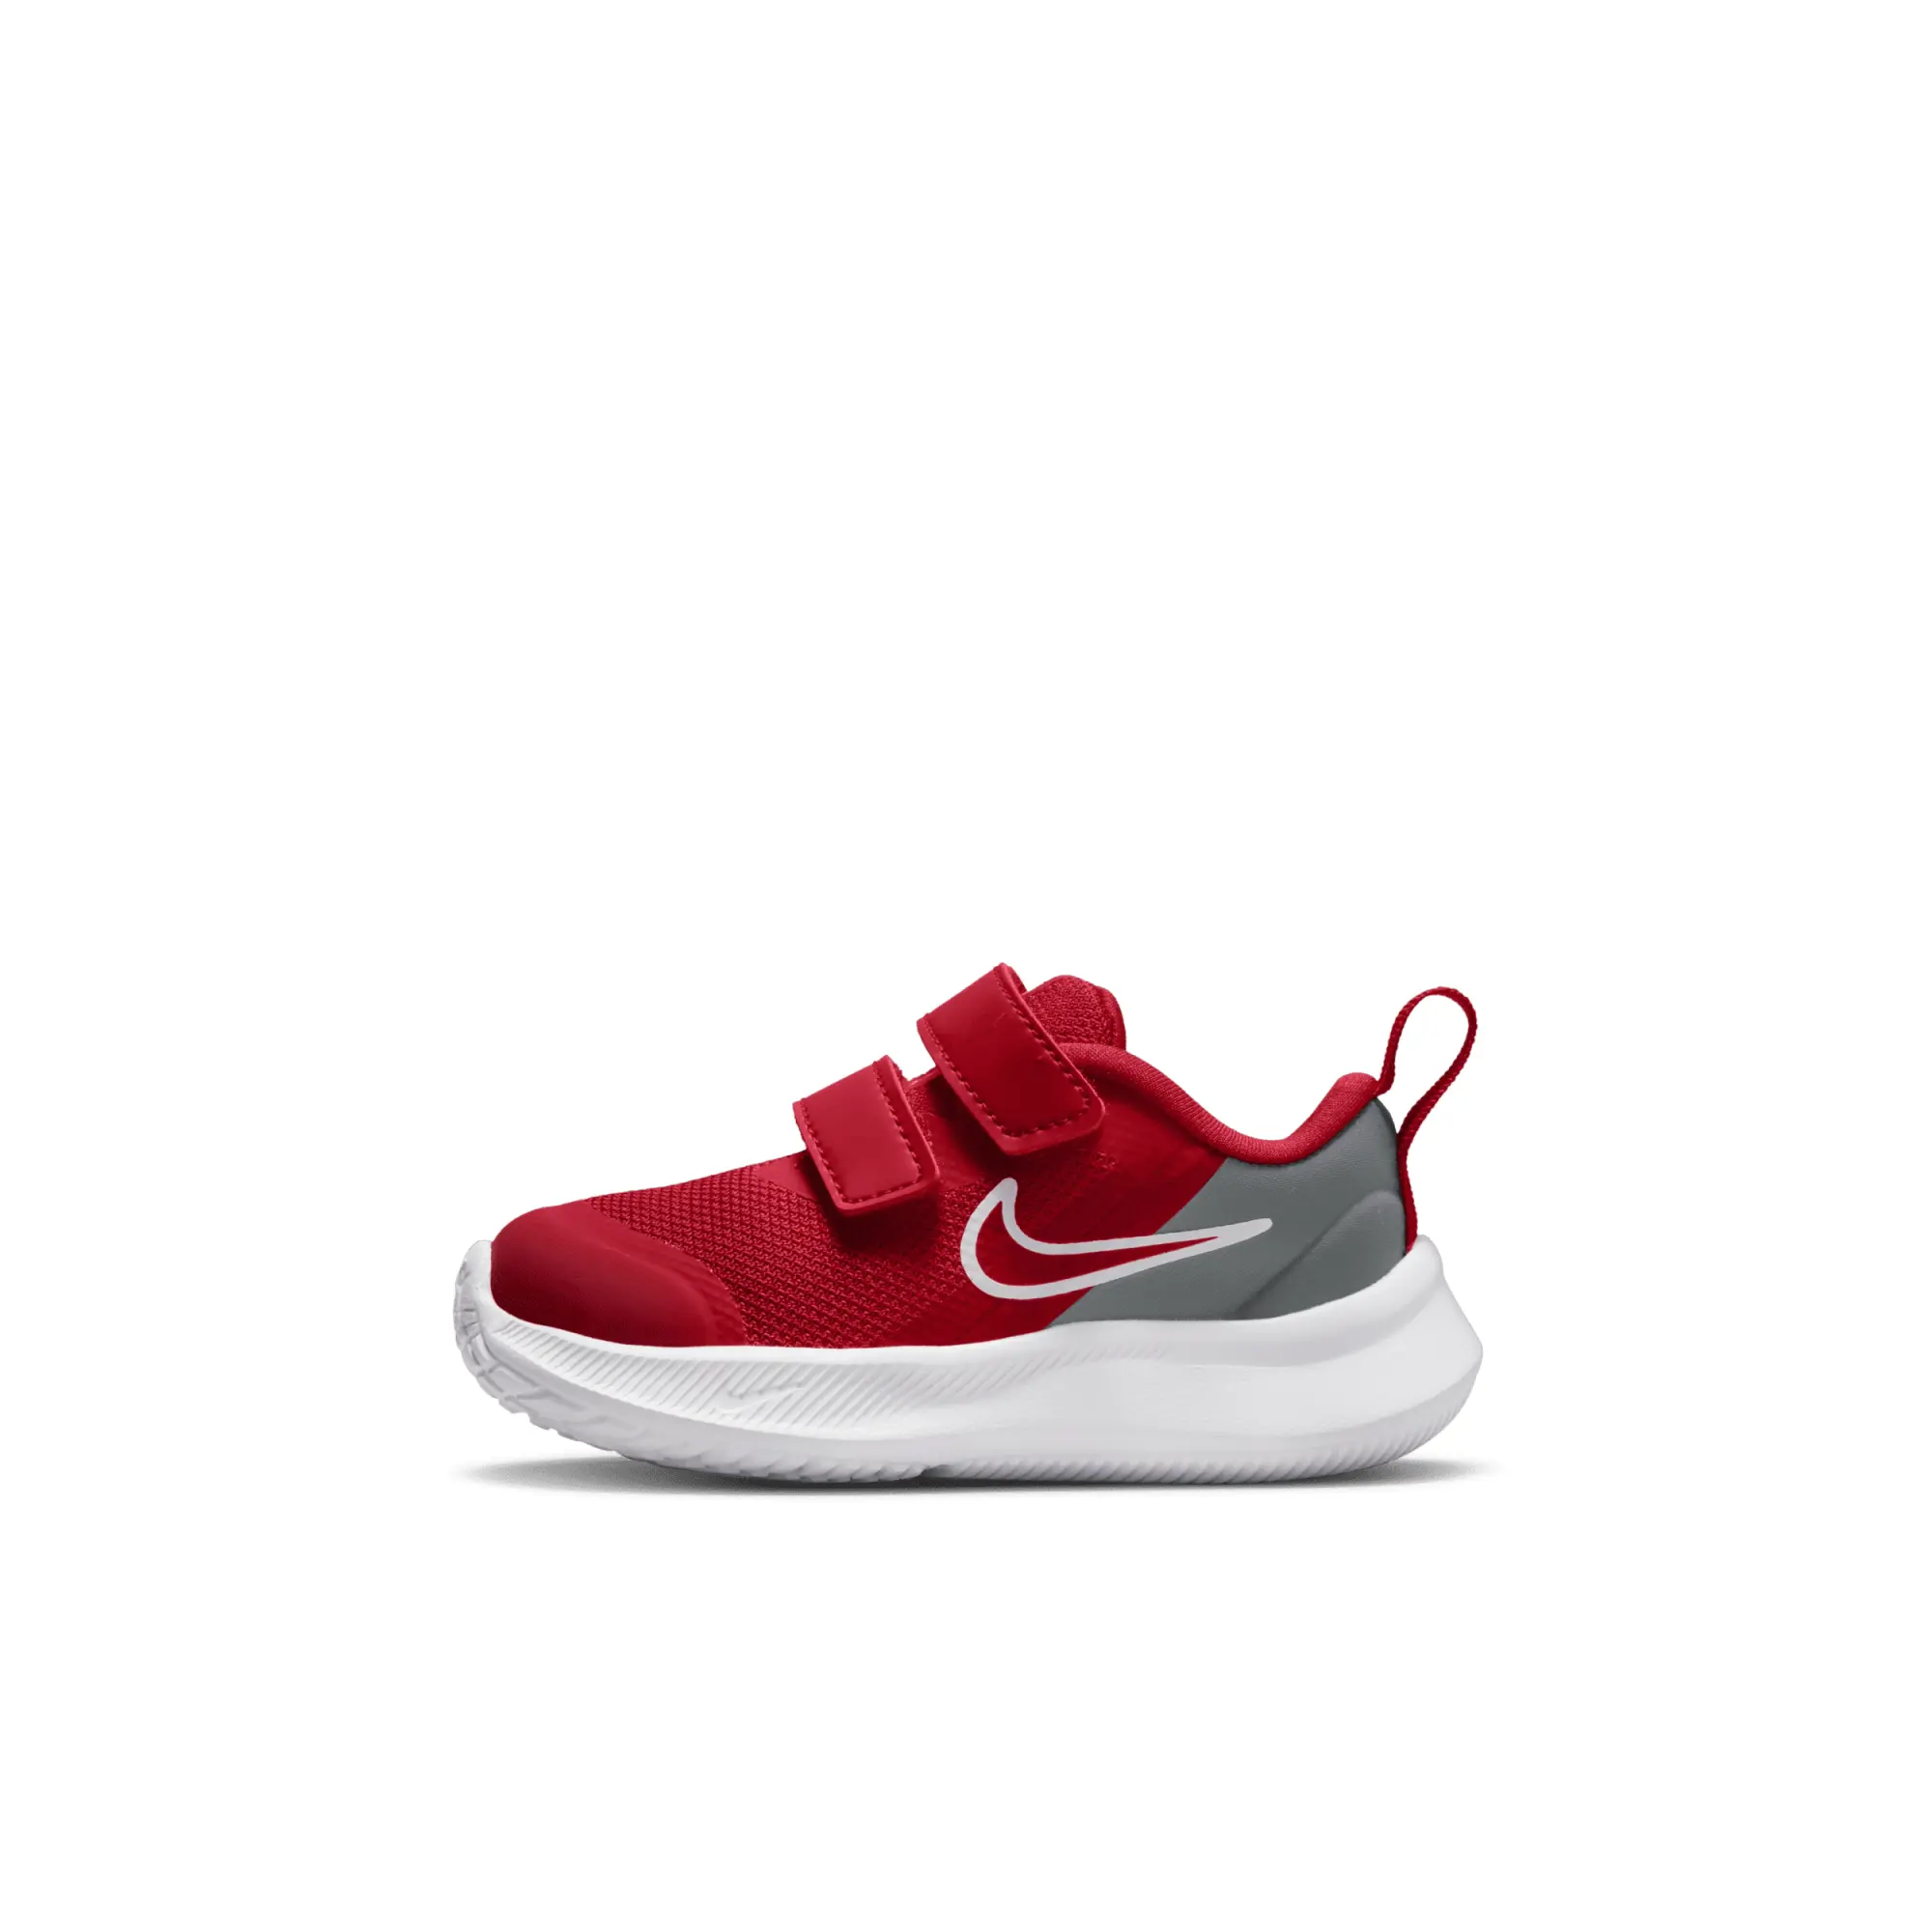 Nike Runner 3 Trainers Infant - Red